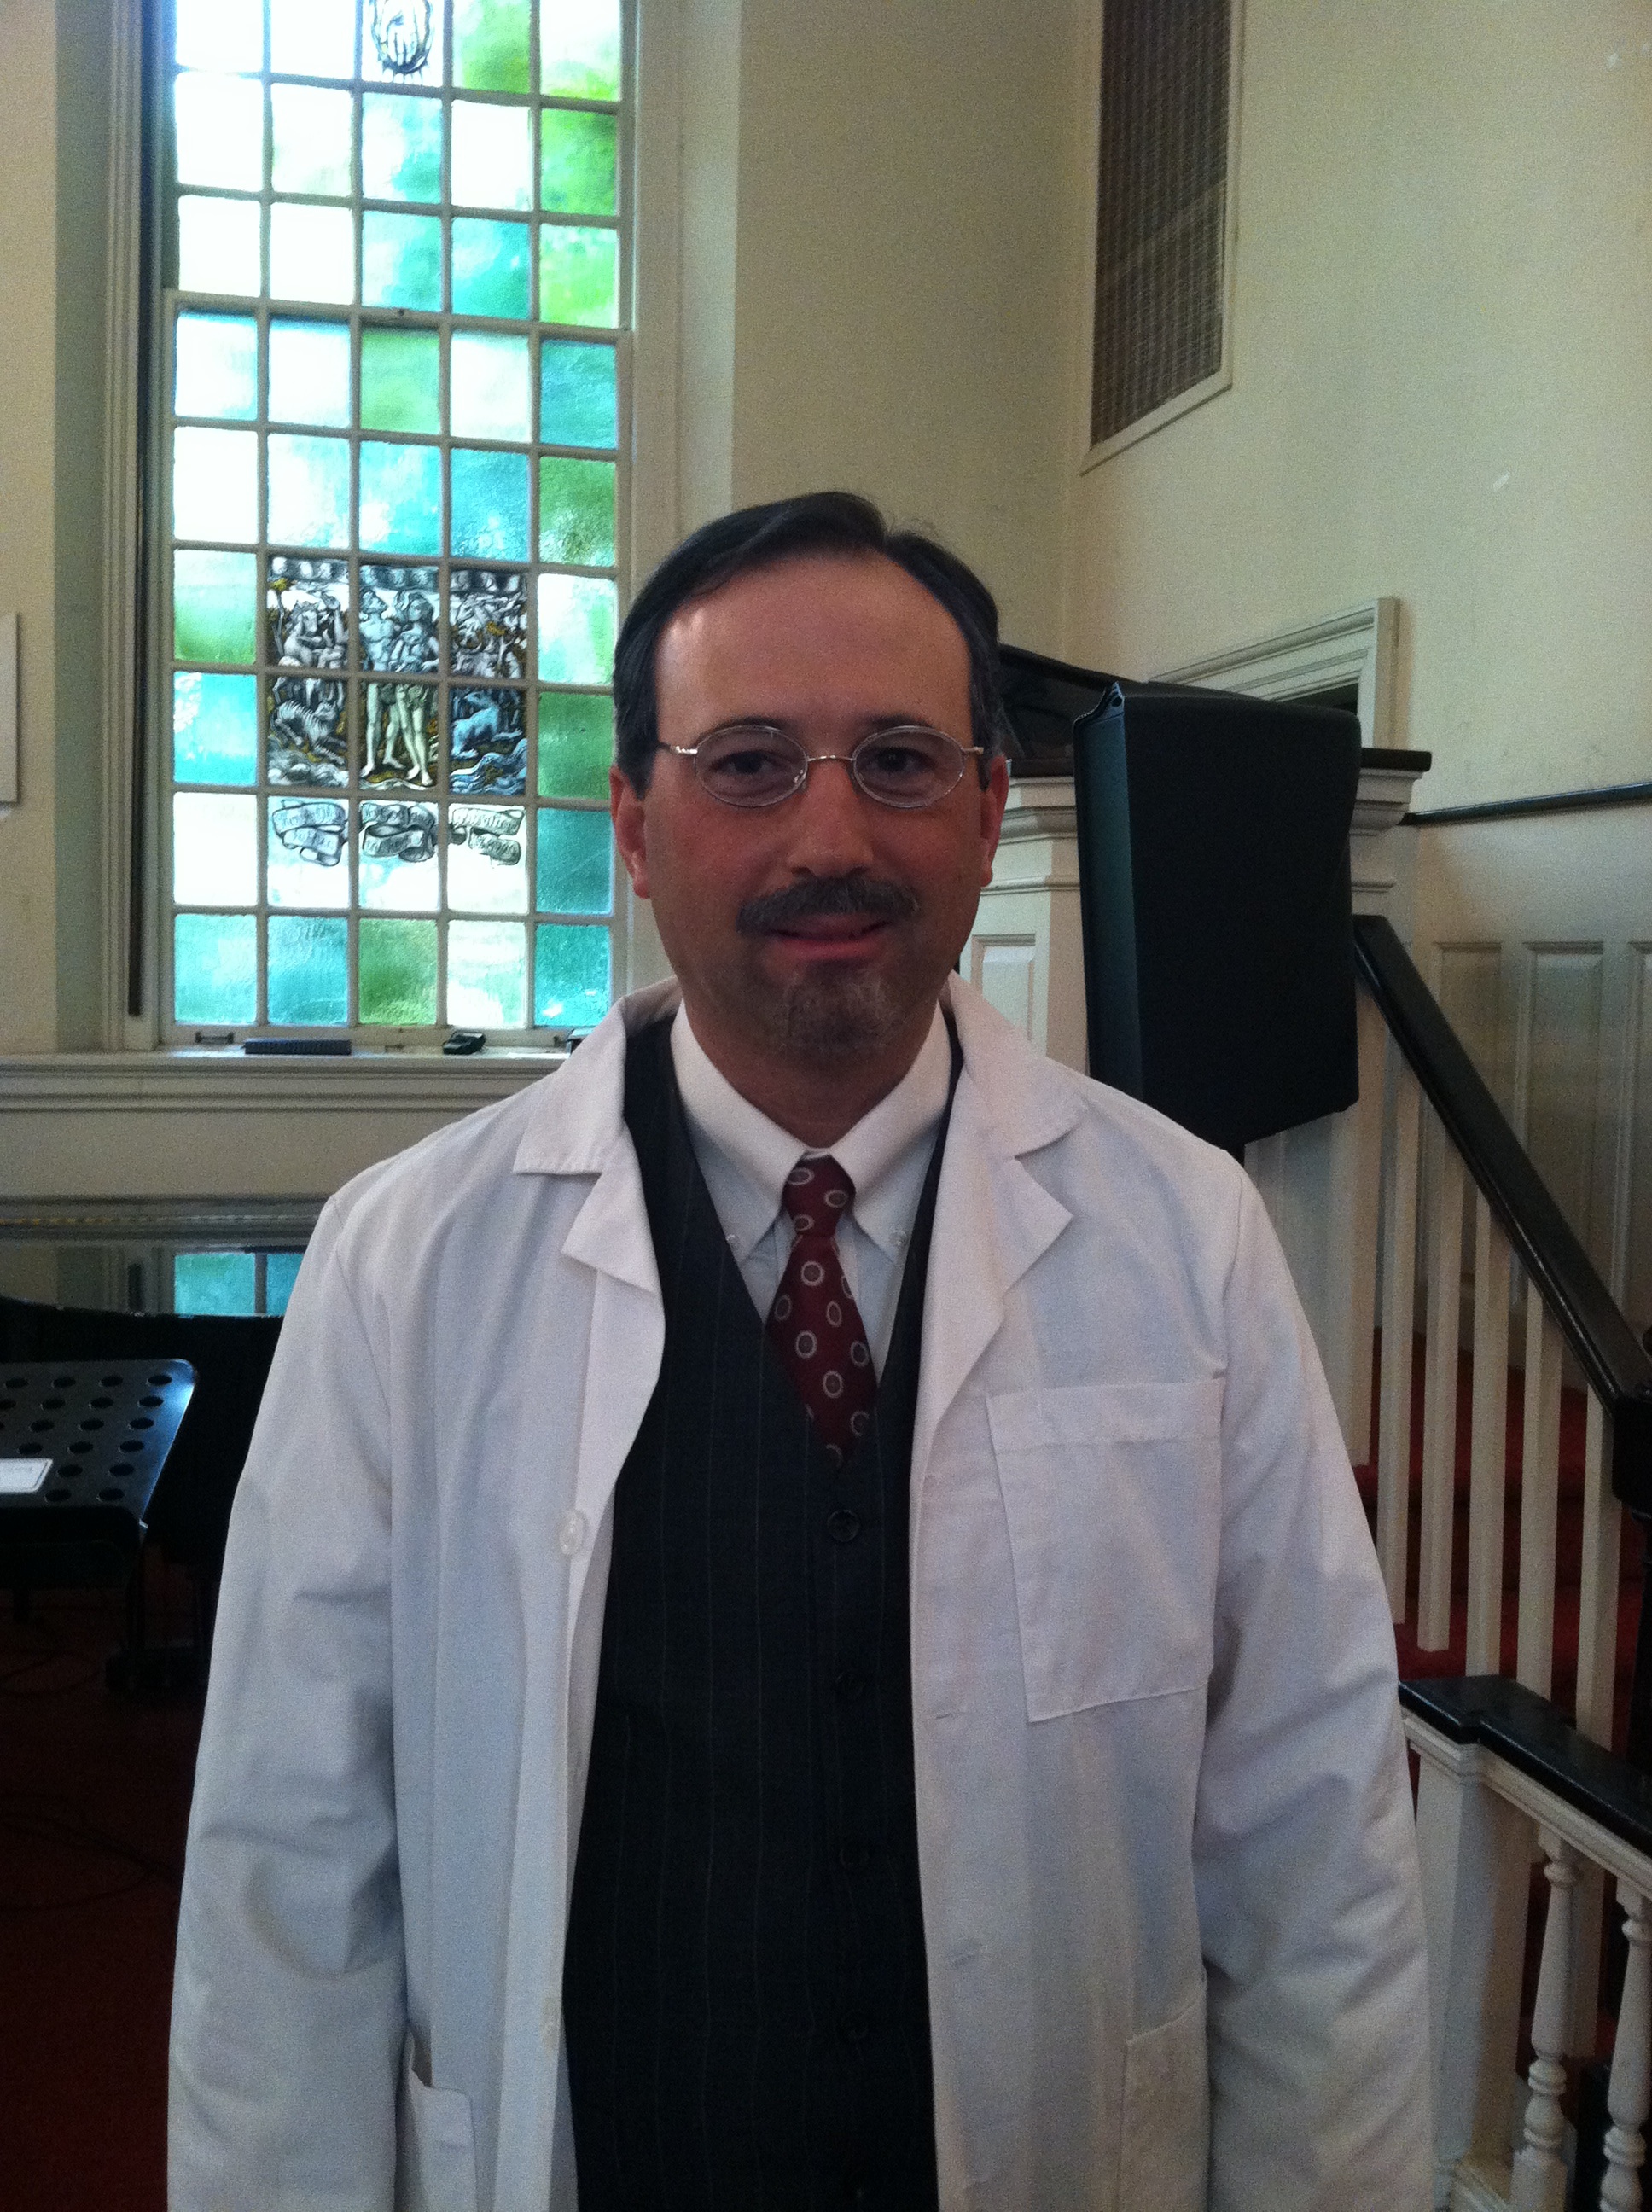 Rob Sciglimpaglia as Dr. John Brinkley on set of Travel Channel's 